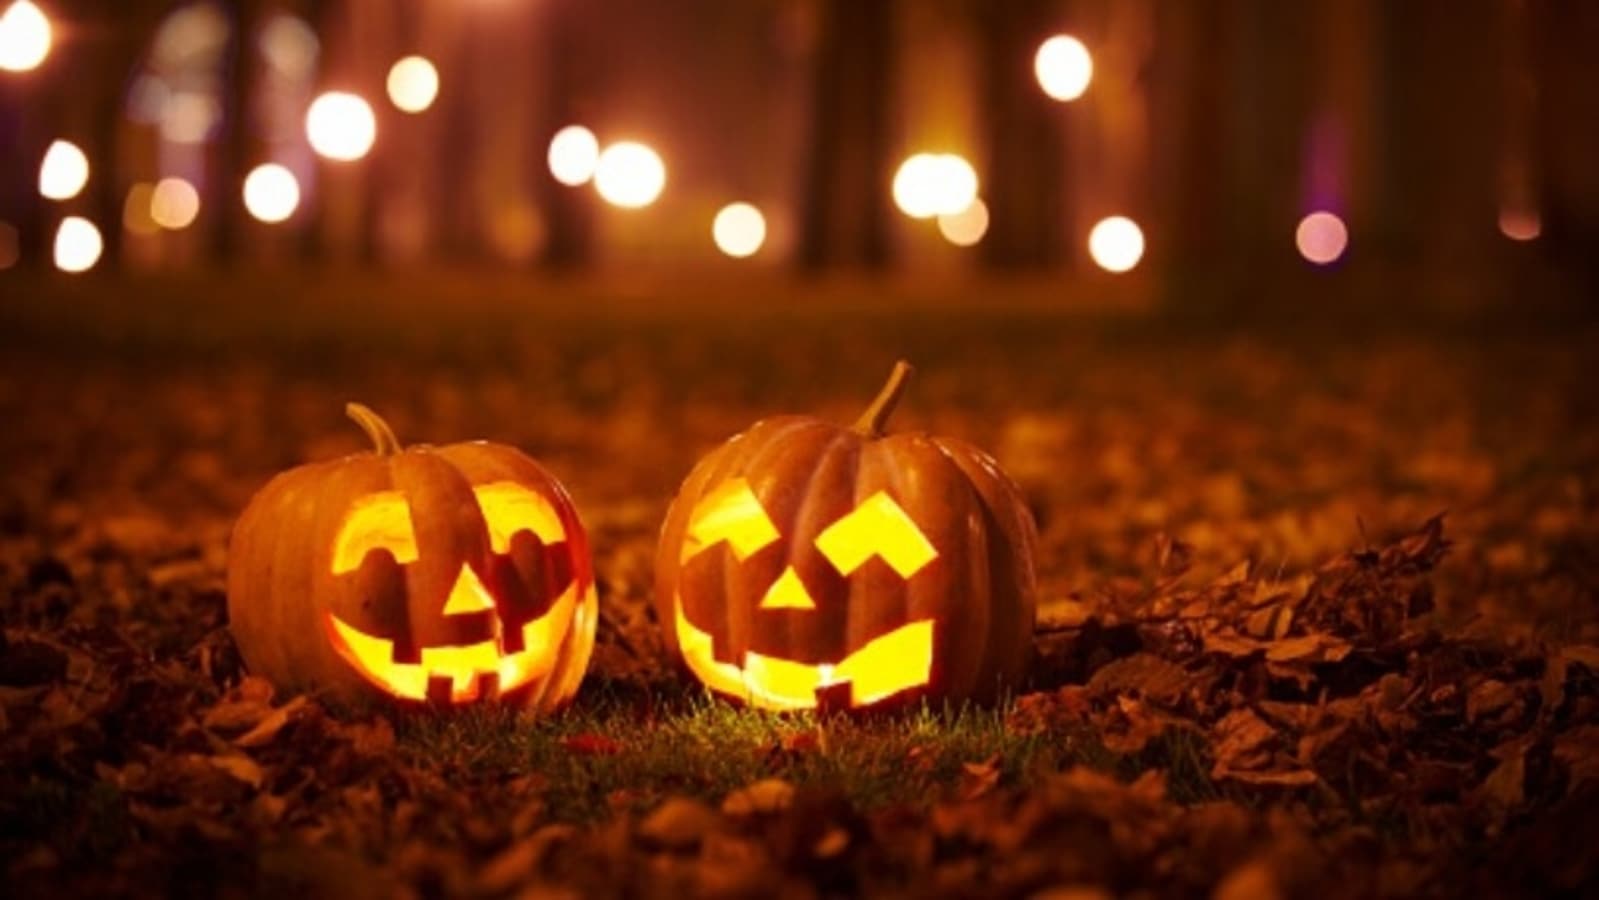 Halloween 2022: Date, Significance, and History